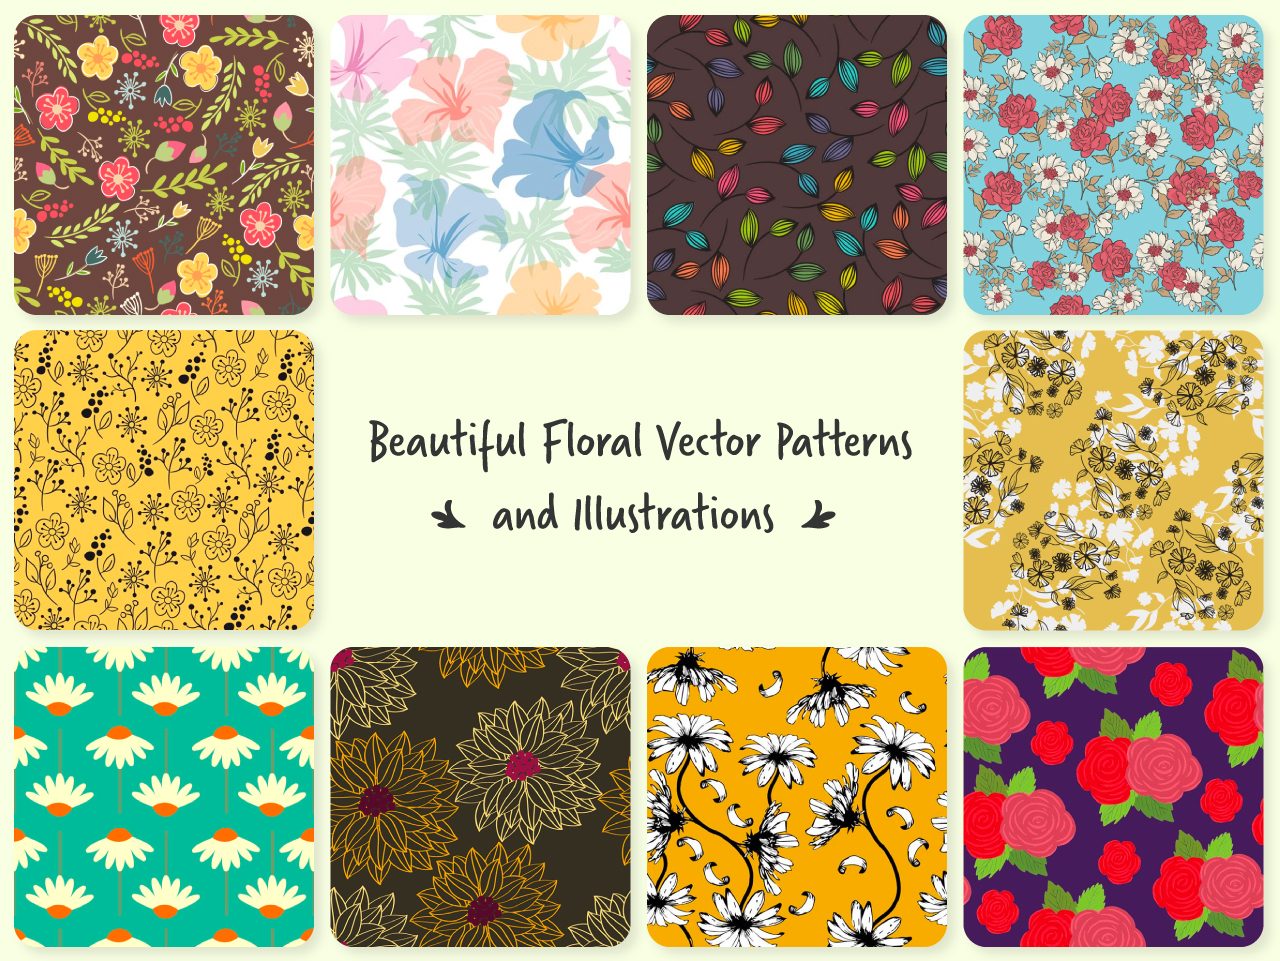 Thumbnail of different floral design patterns